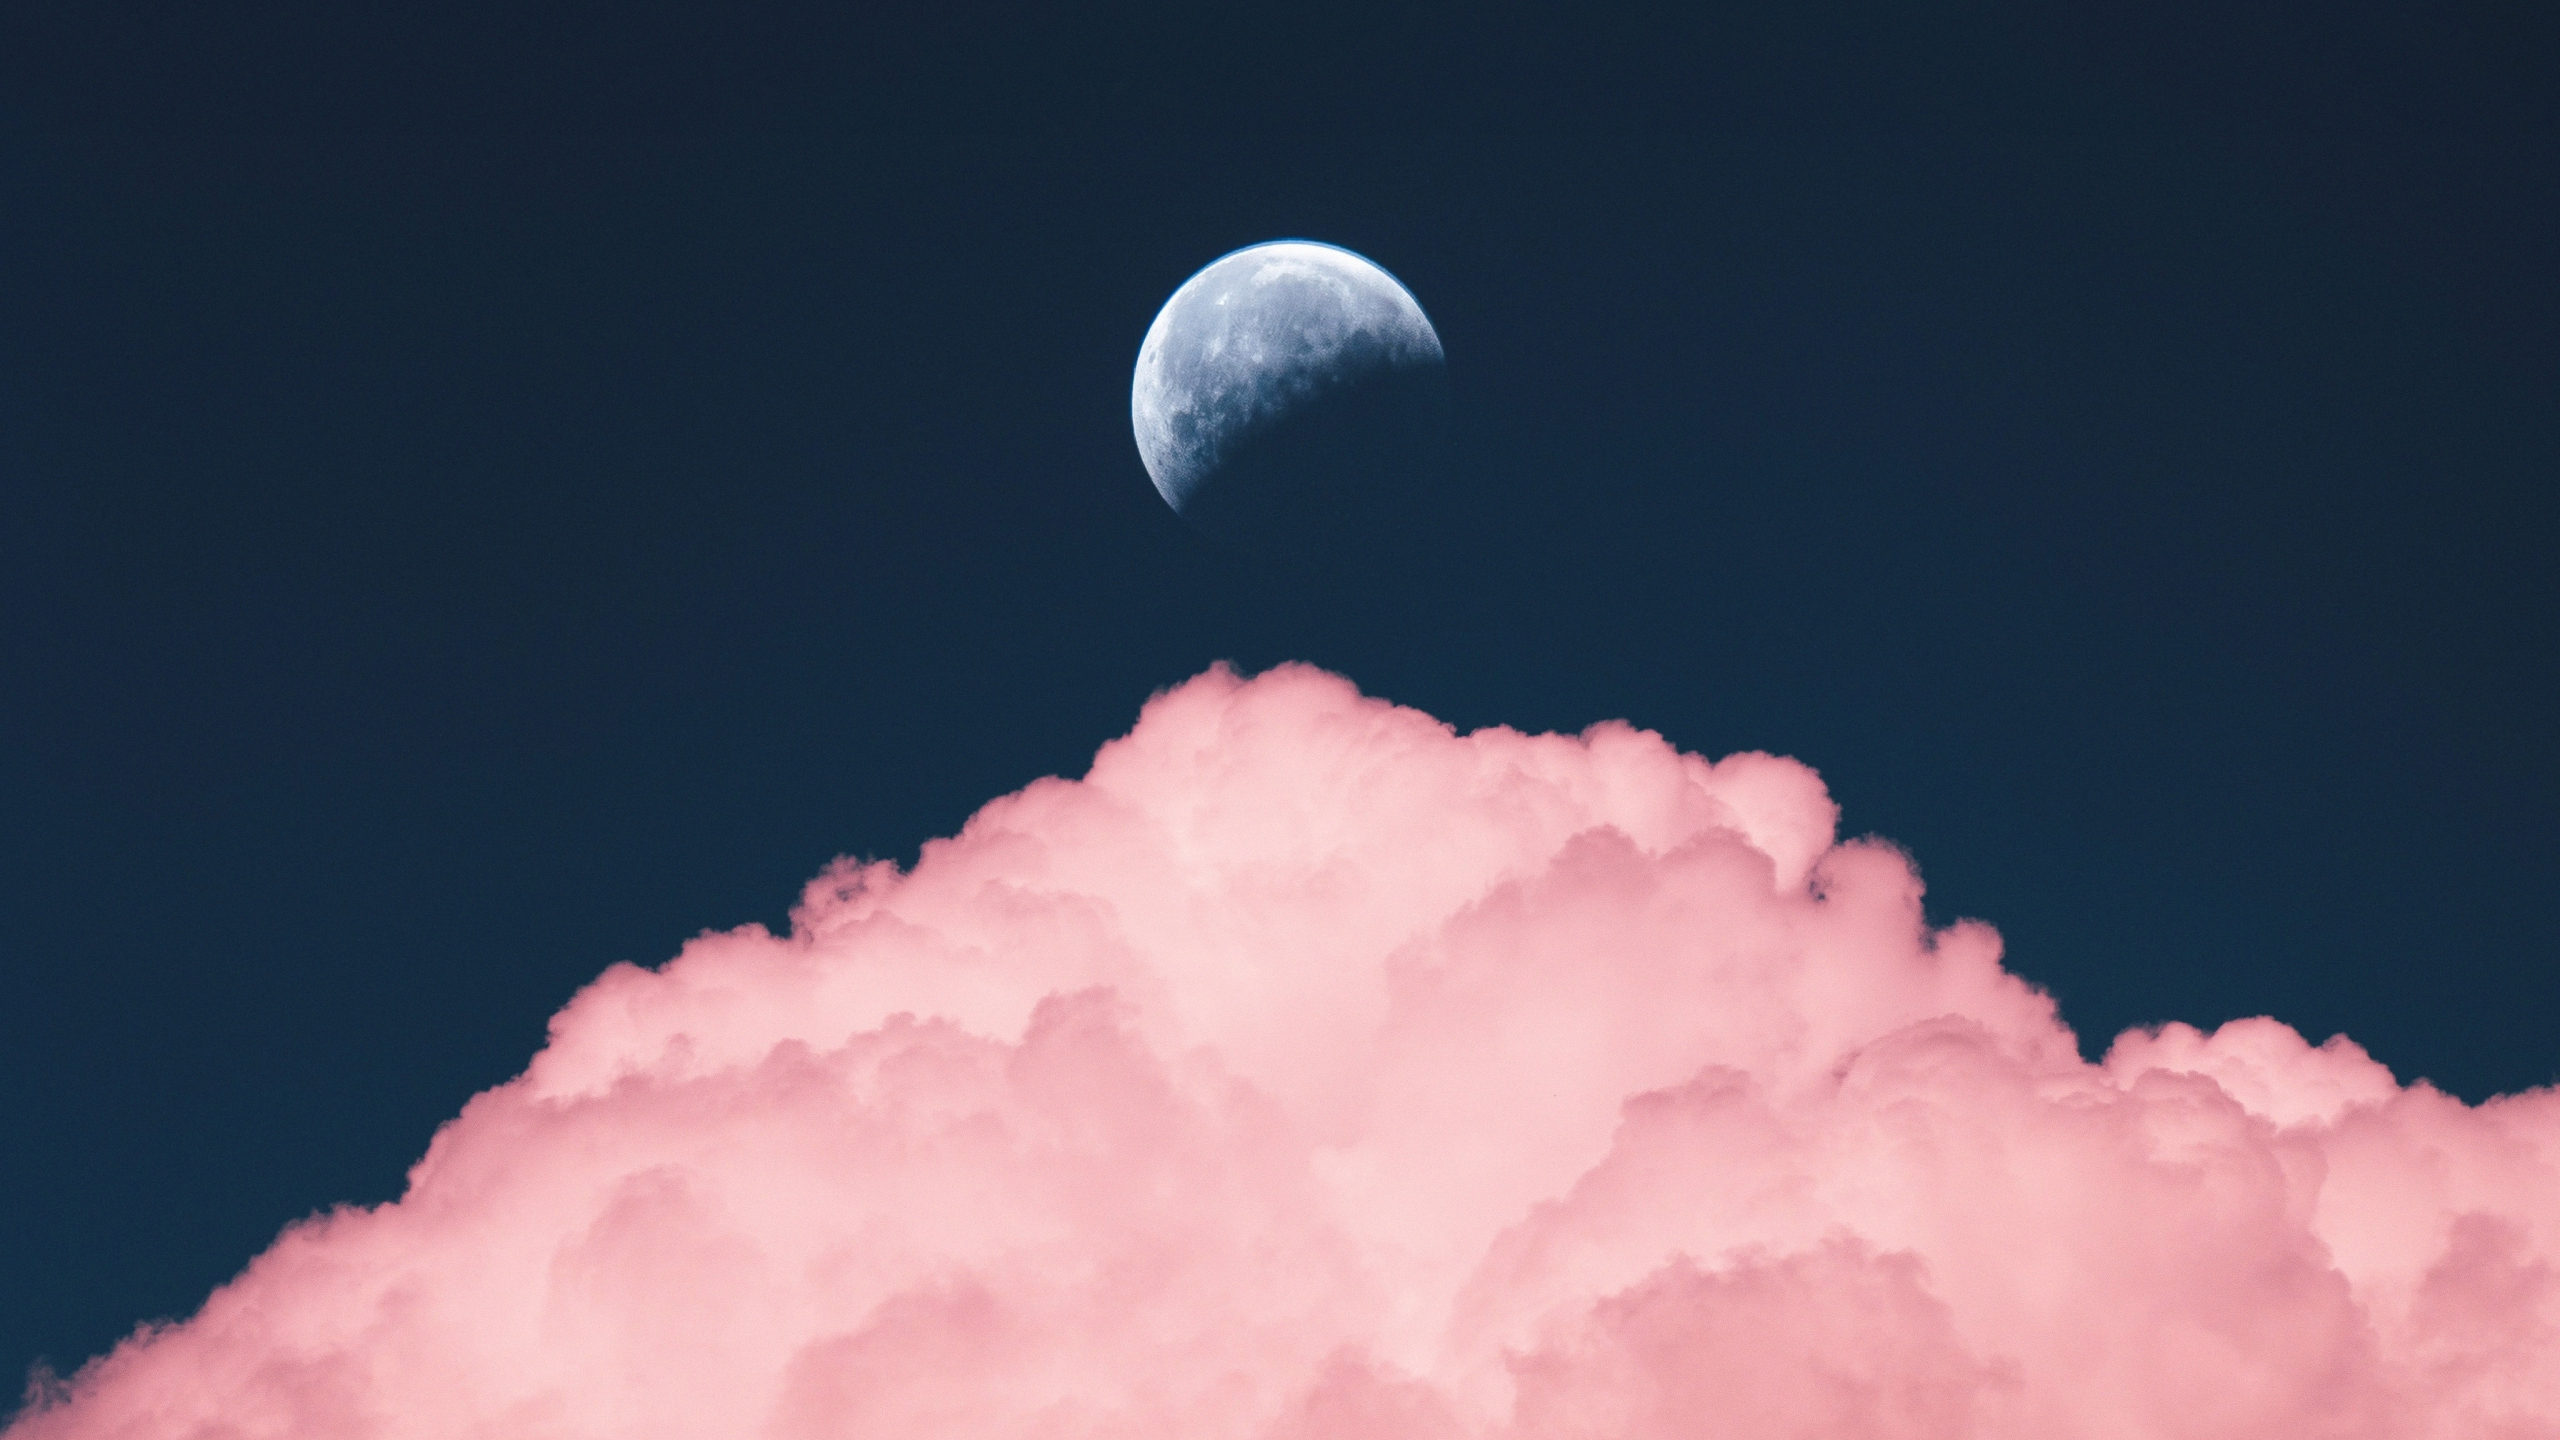 A pink cloud with a half moon in the sky - 2560x1440